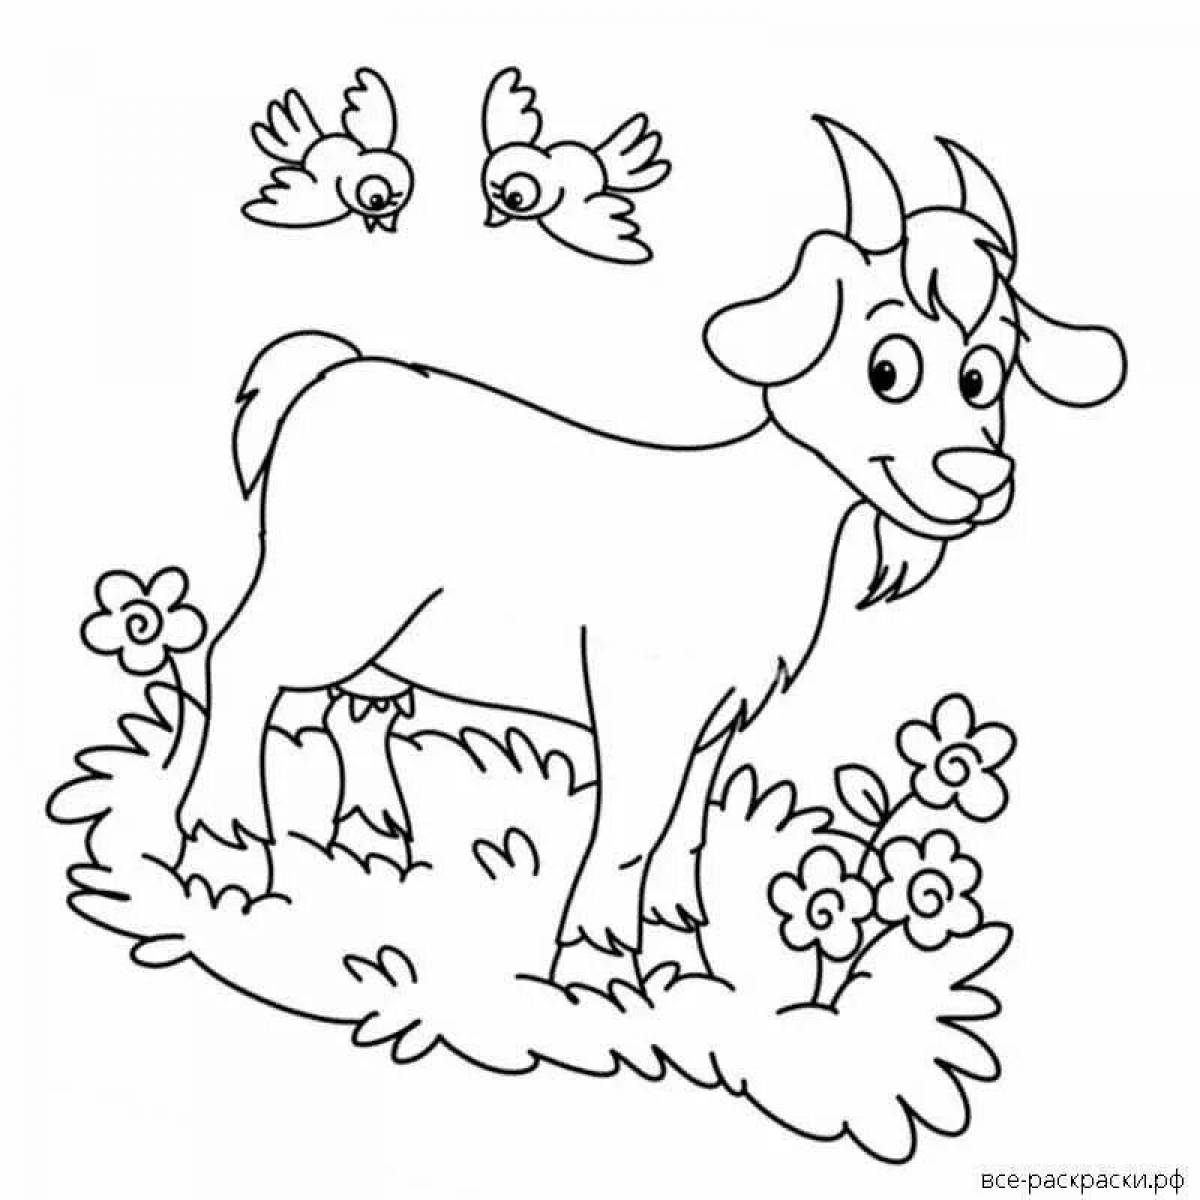 Funny goat coloring for kids